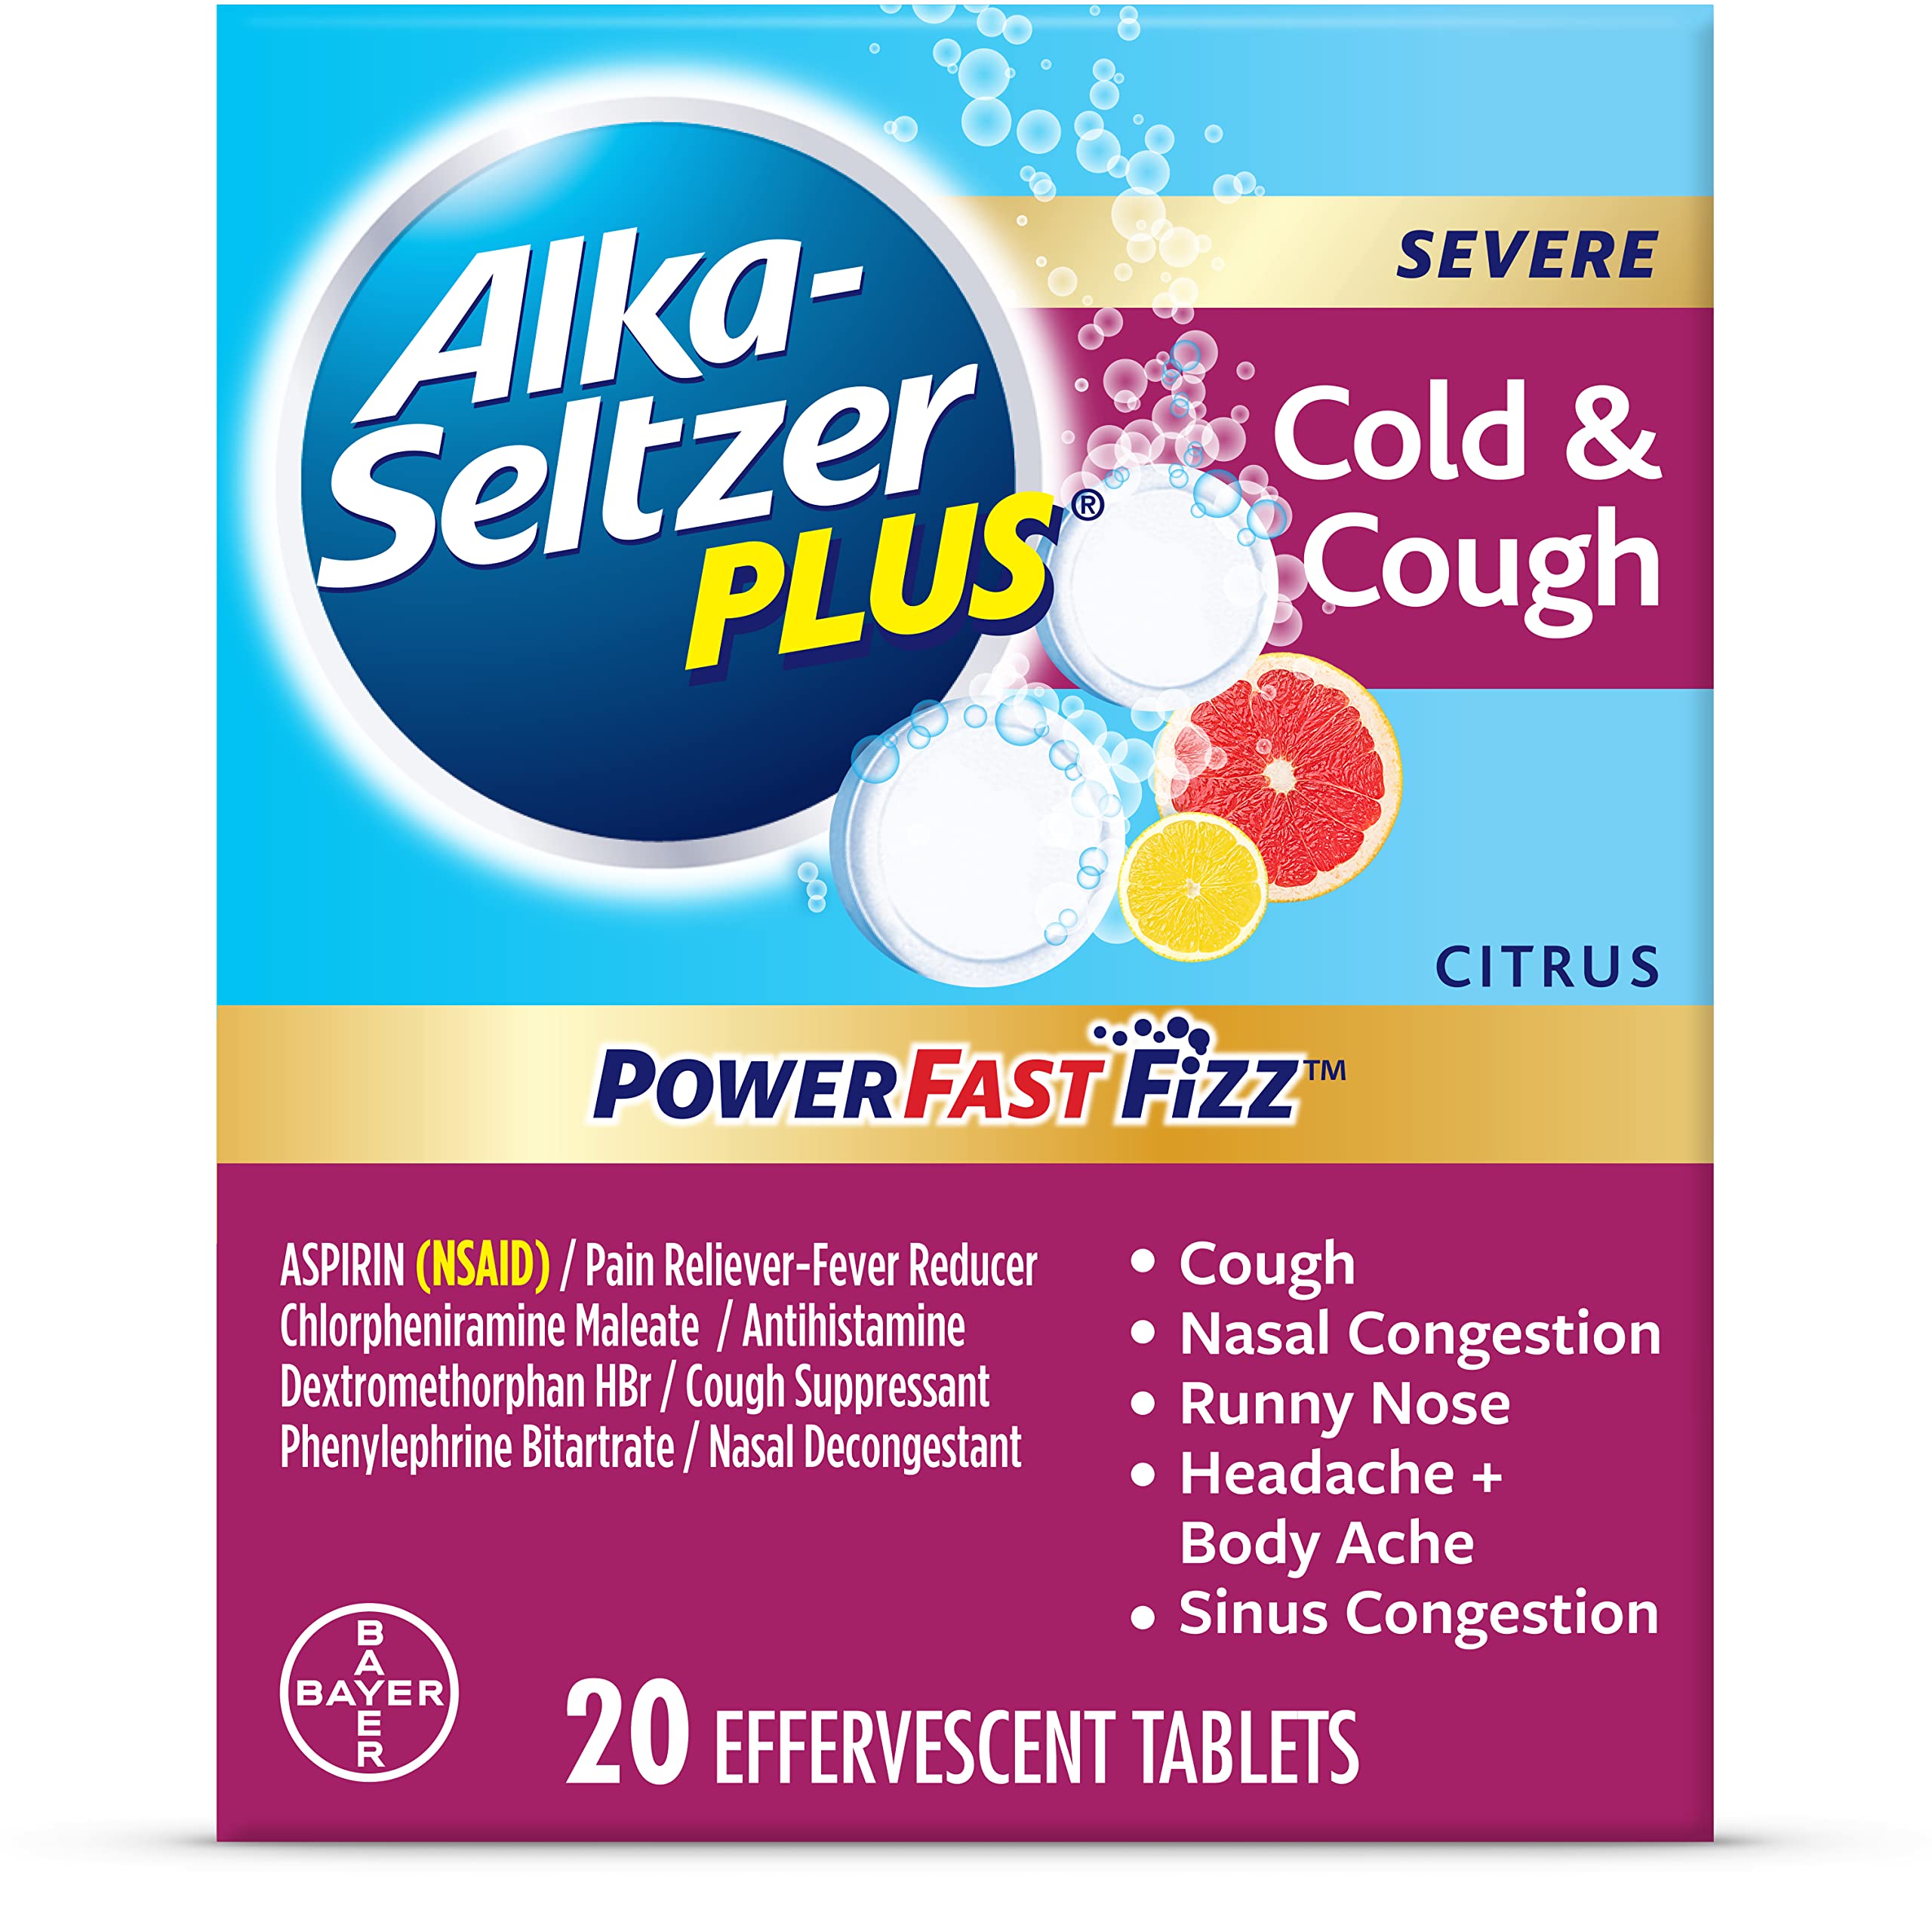 Alka-seltzer Plus ALKA SELTZER PLUS Severe Non-Drowsy cold  cough Powerfast Fizz Effervescent common cold Tablets, Sinus congestion, Runny Nose, a